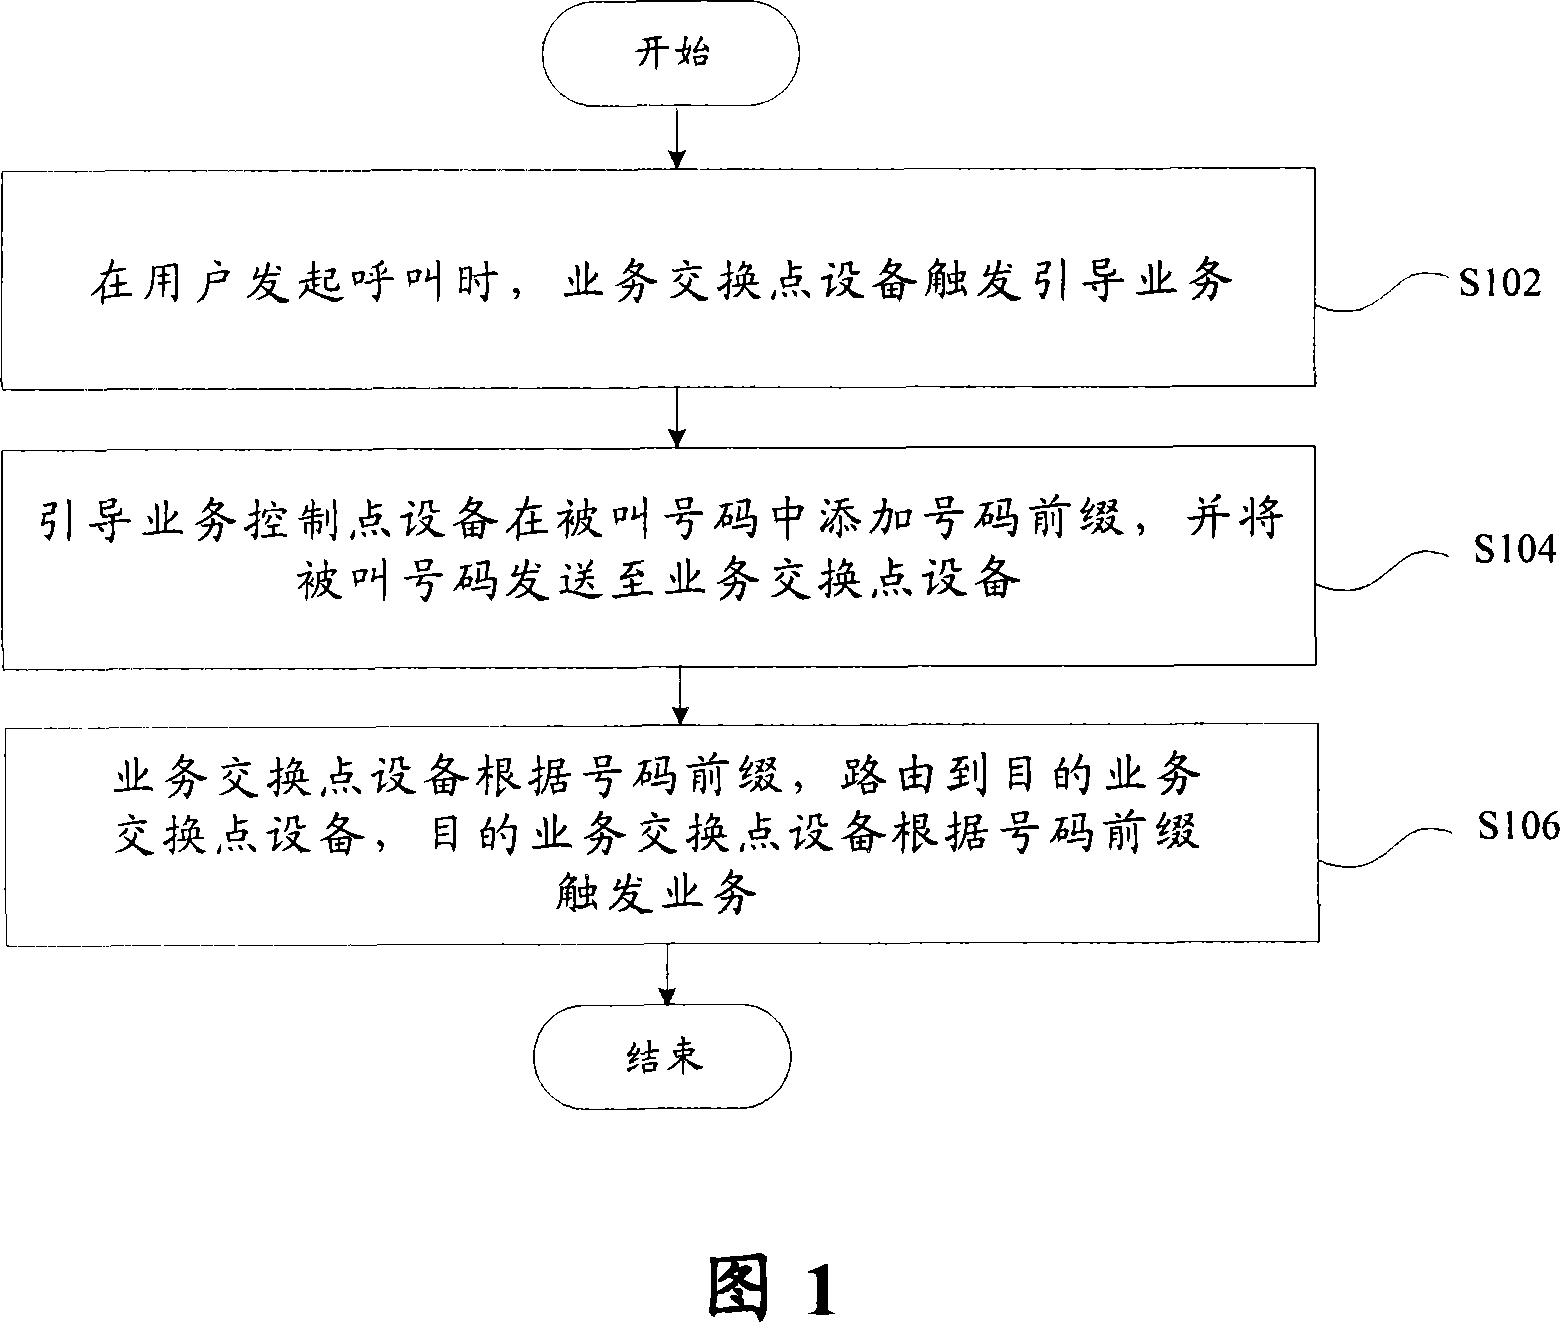 Method and system for second trigger of CDMA intelligent network service call